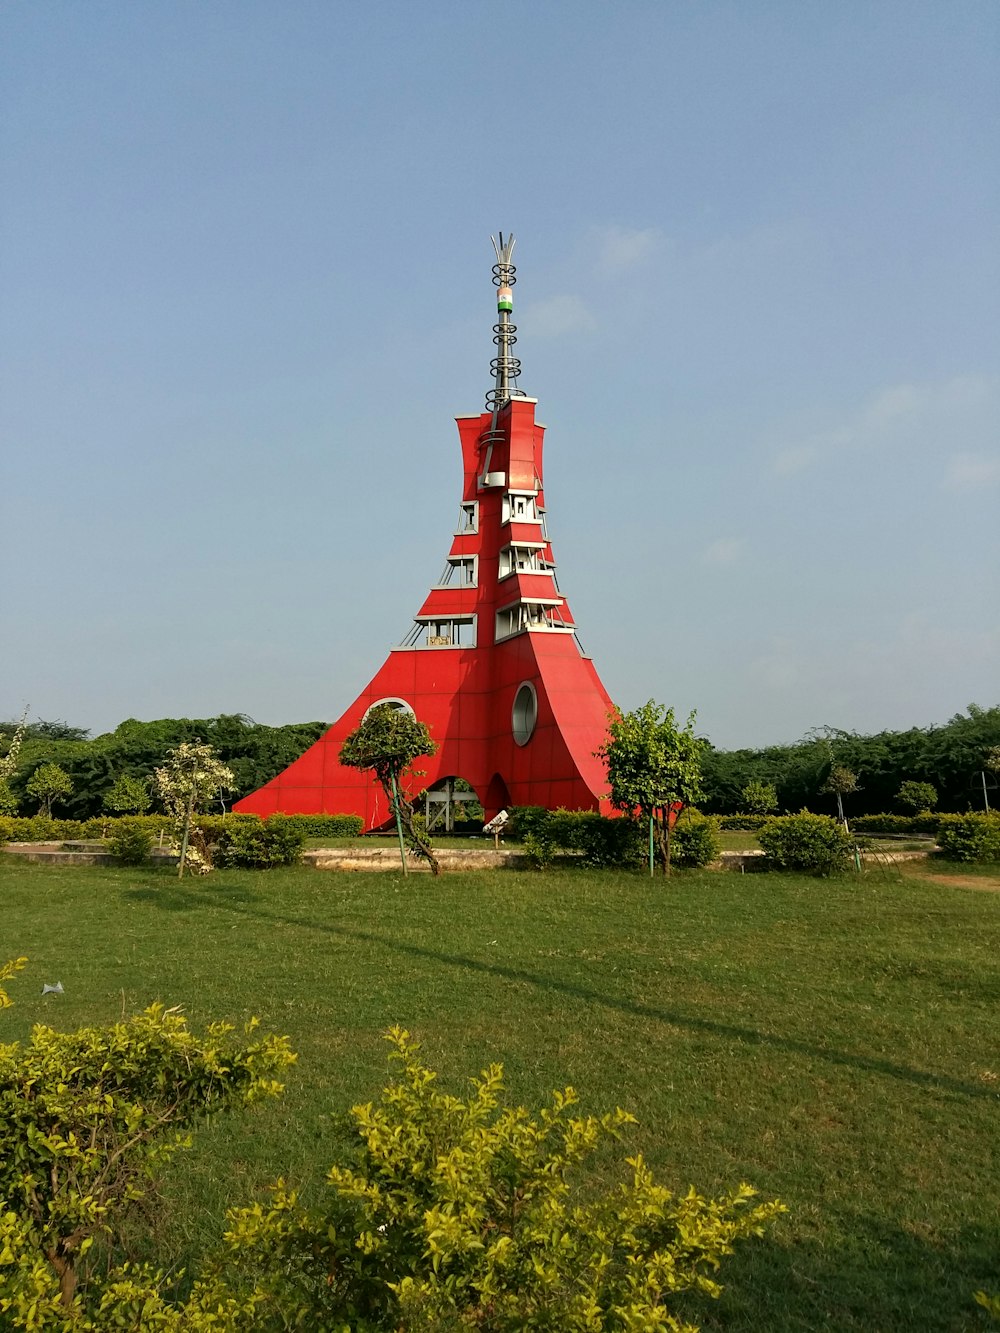 a very tall red tower sitting in the middle of a lush green field